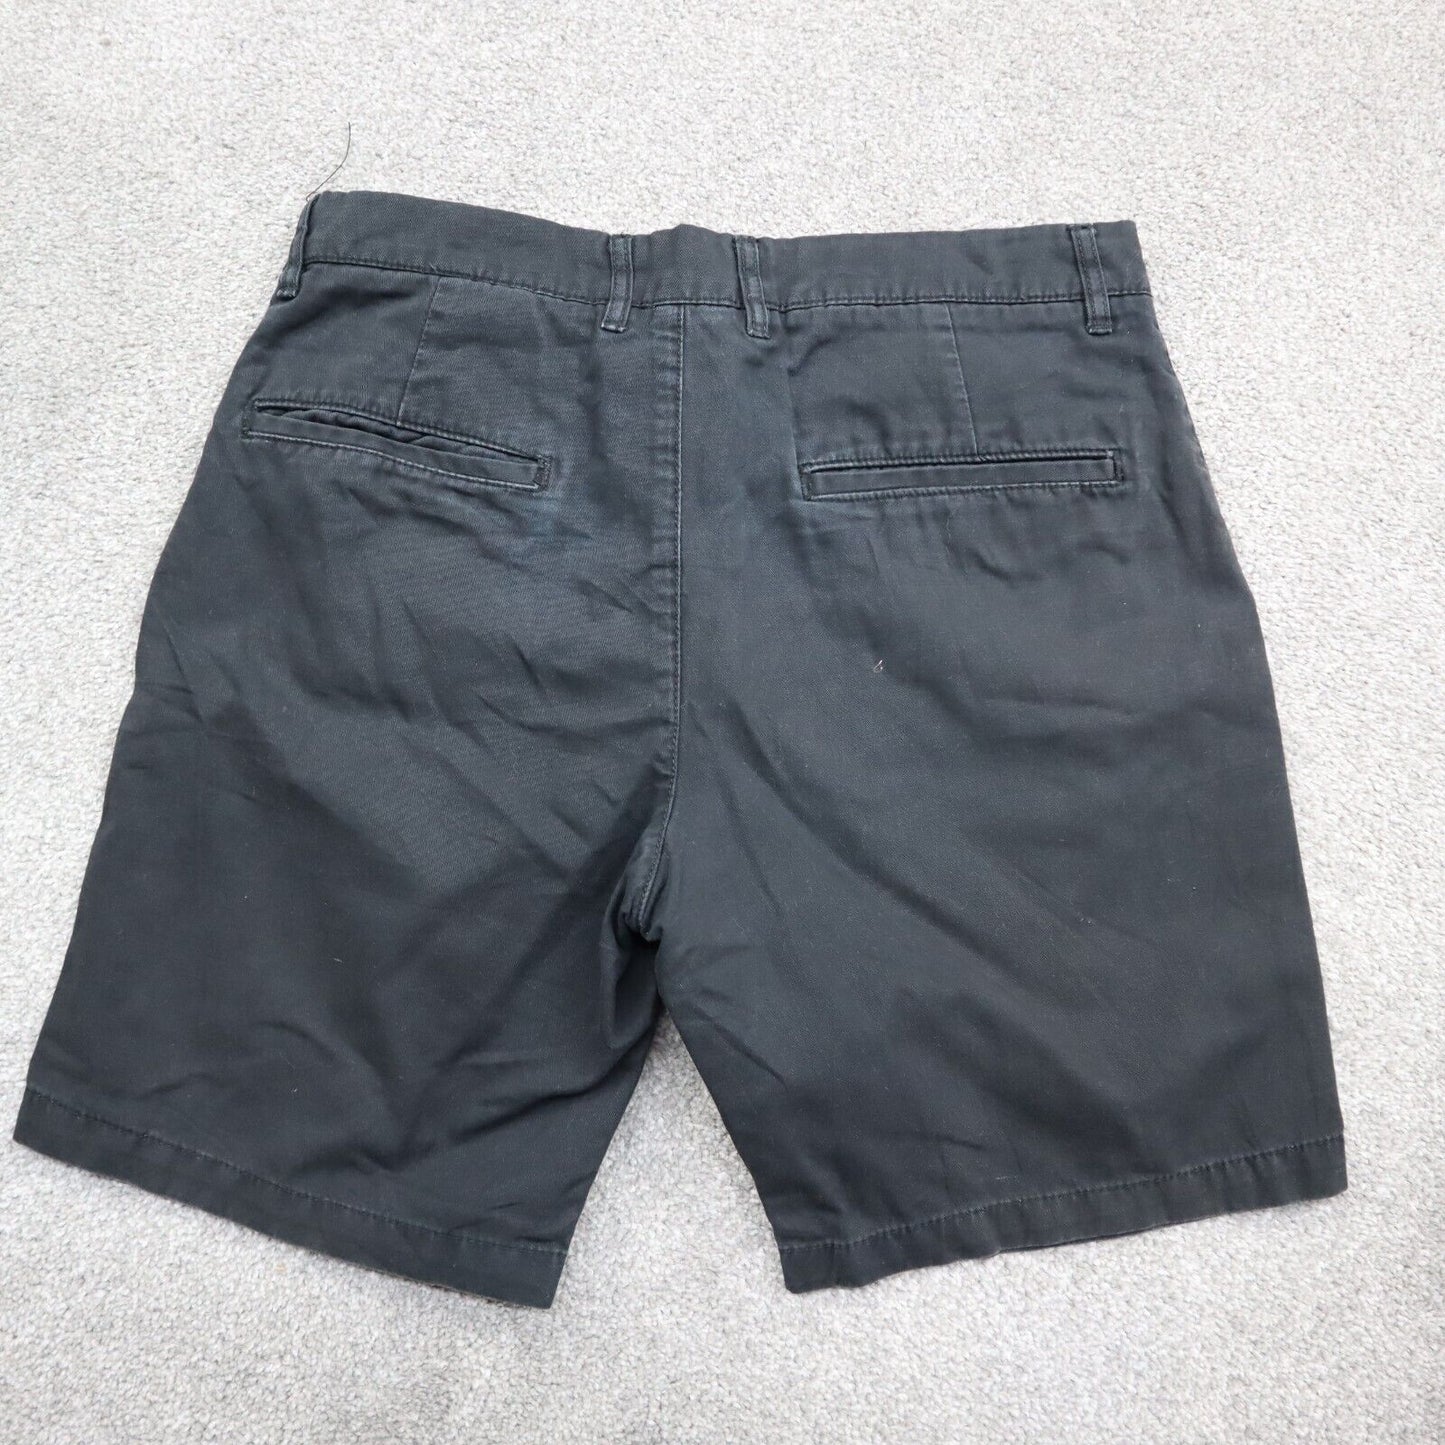 H&M LOOG Mens Baggy Shorts Flat Front Hiking Outdoor Pockets Black Size 29